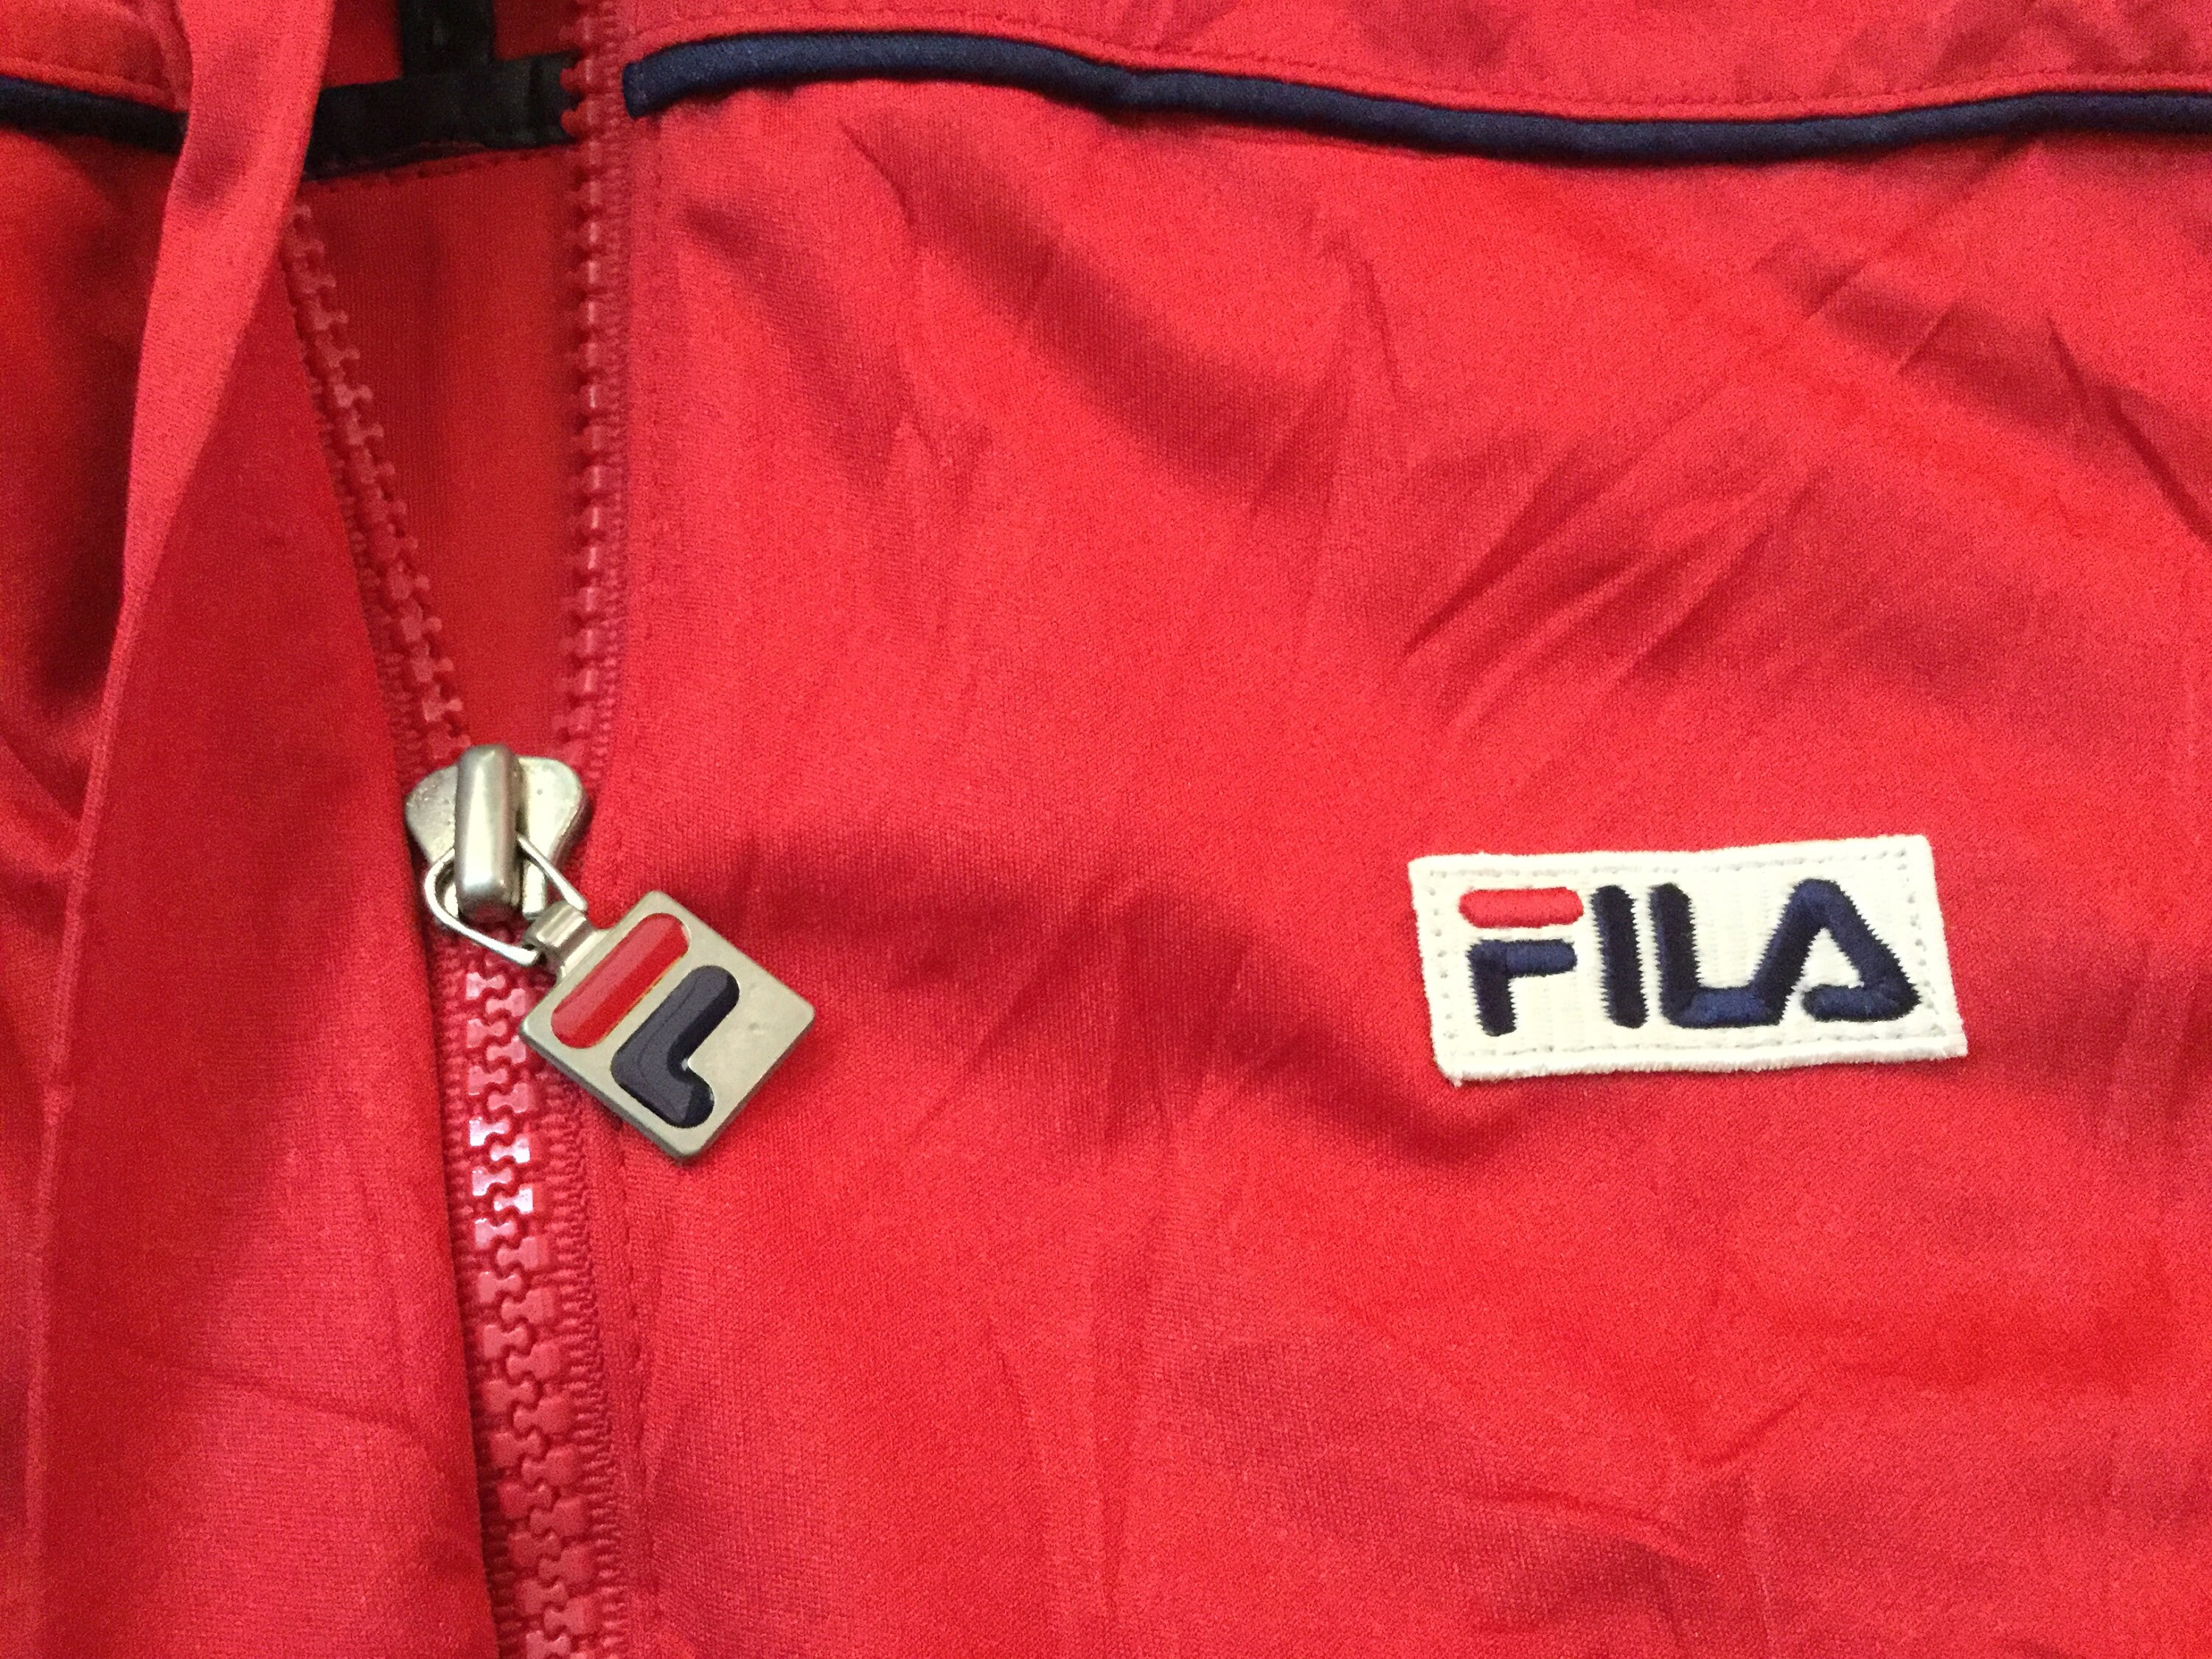 Fila Gore-tex Fabrics Two Snap Button and Full Zip Jacket - Etsy